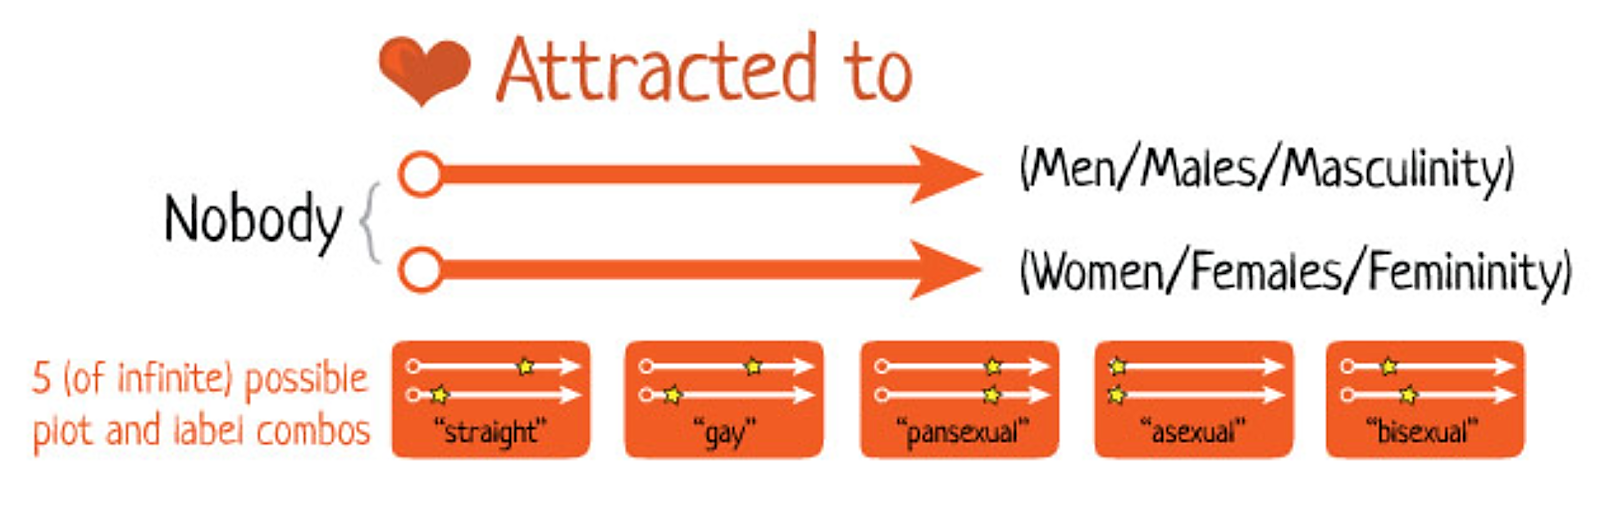 A section of The Genderbread Person v2.0 illustration, showing the spectrum of attraction. There are two parallel arrows showing the spectrums. The top arrow ranges from "Nobody" to "Men/Males/Masculinity" and the bottom arrow ranges from "Nobody" to "Women/Females/Femininity." At the bottom of the illustration there are 5 possible plot and label combinations, including "straight," "gay," "pansexual," "asexual," and "bisexual."